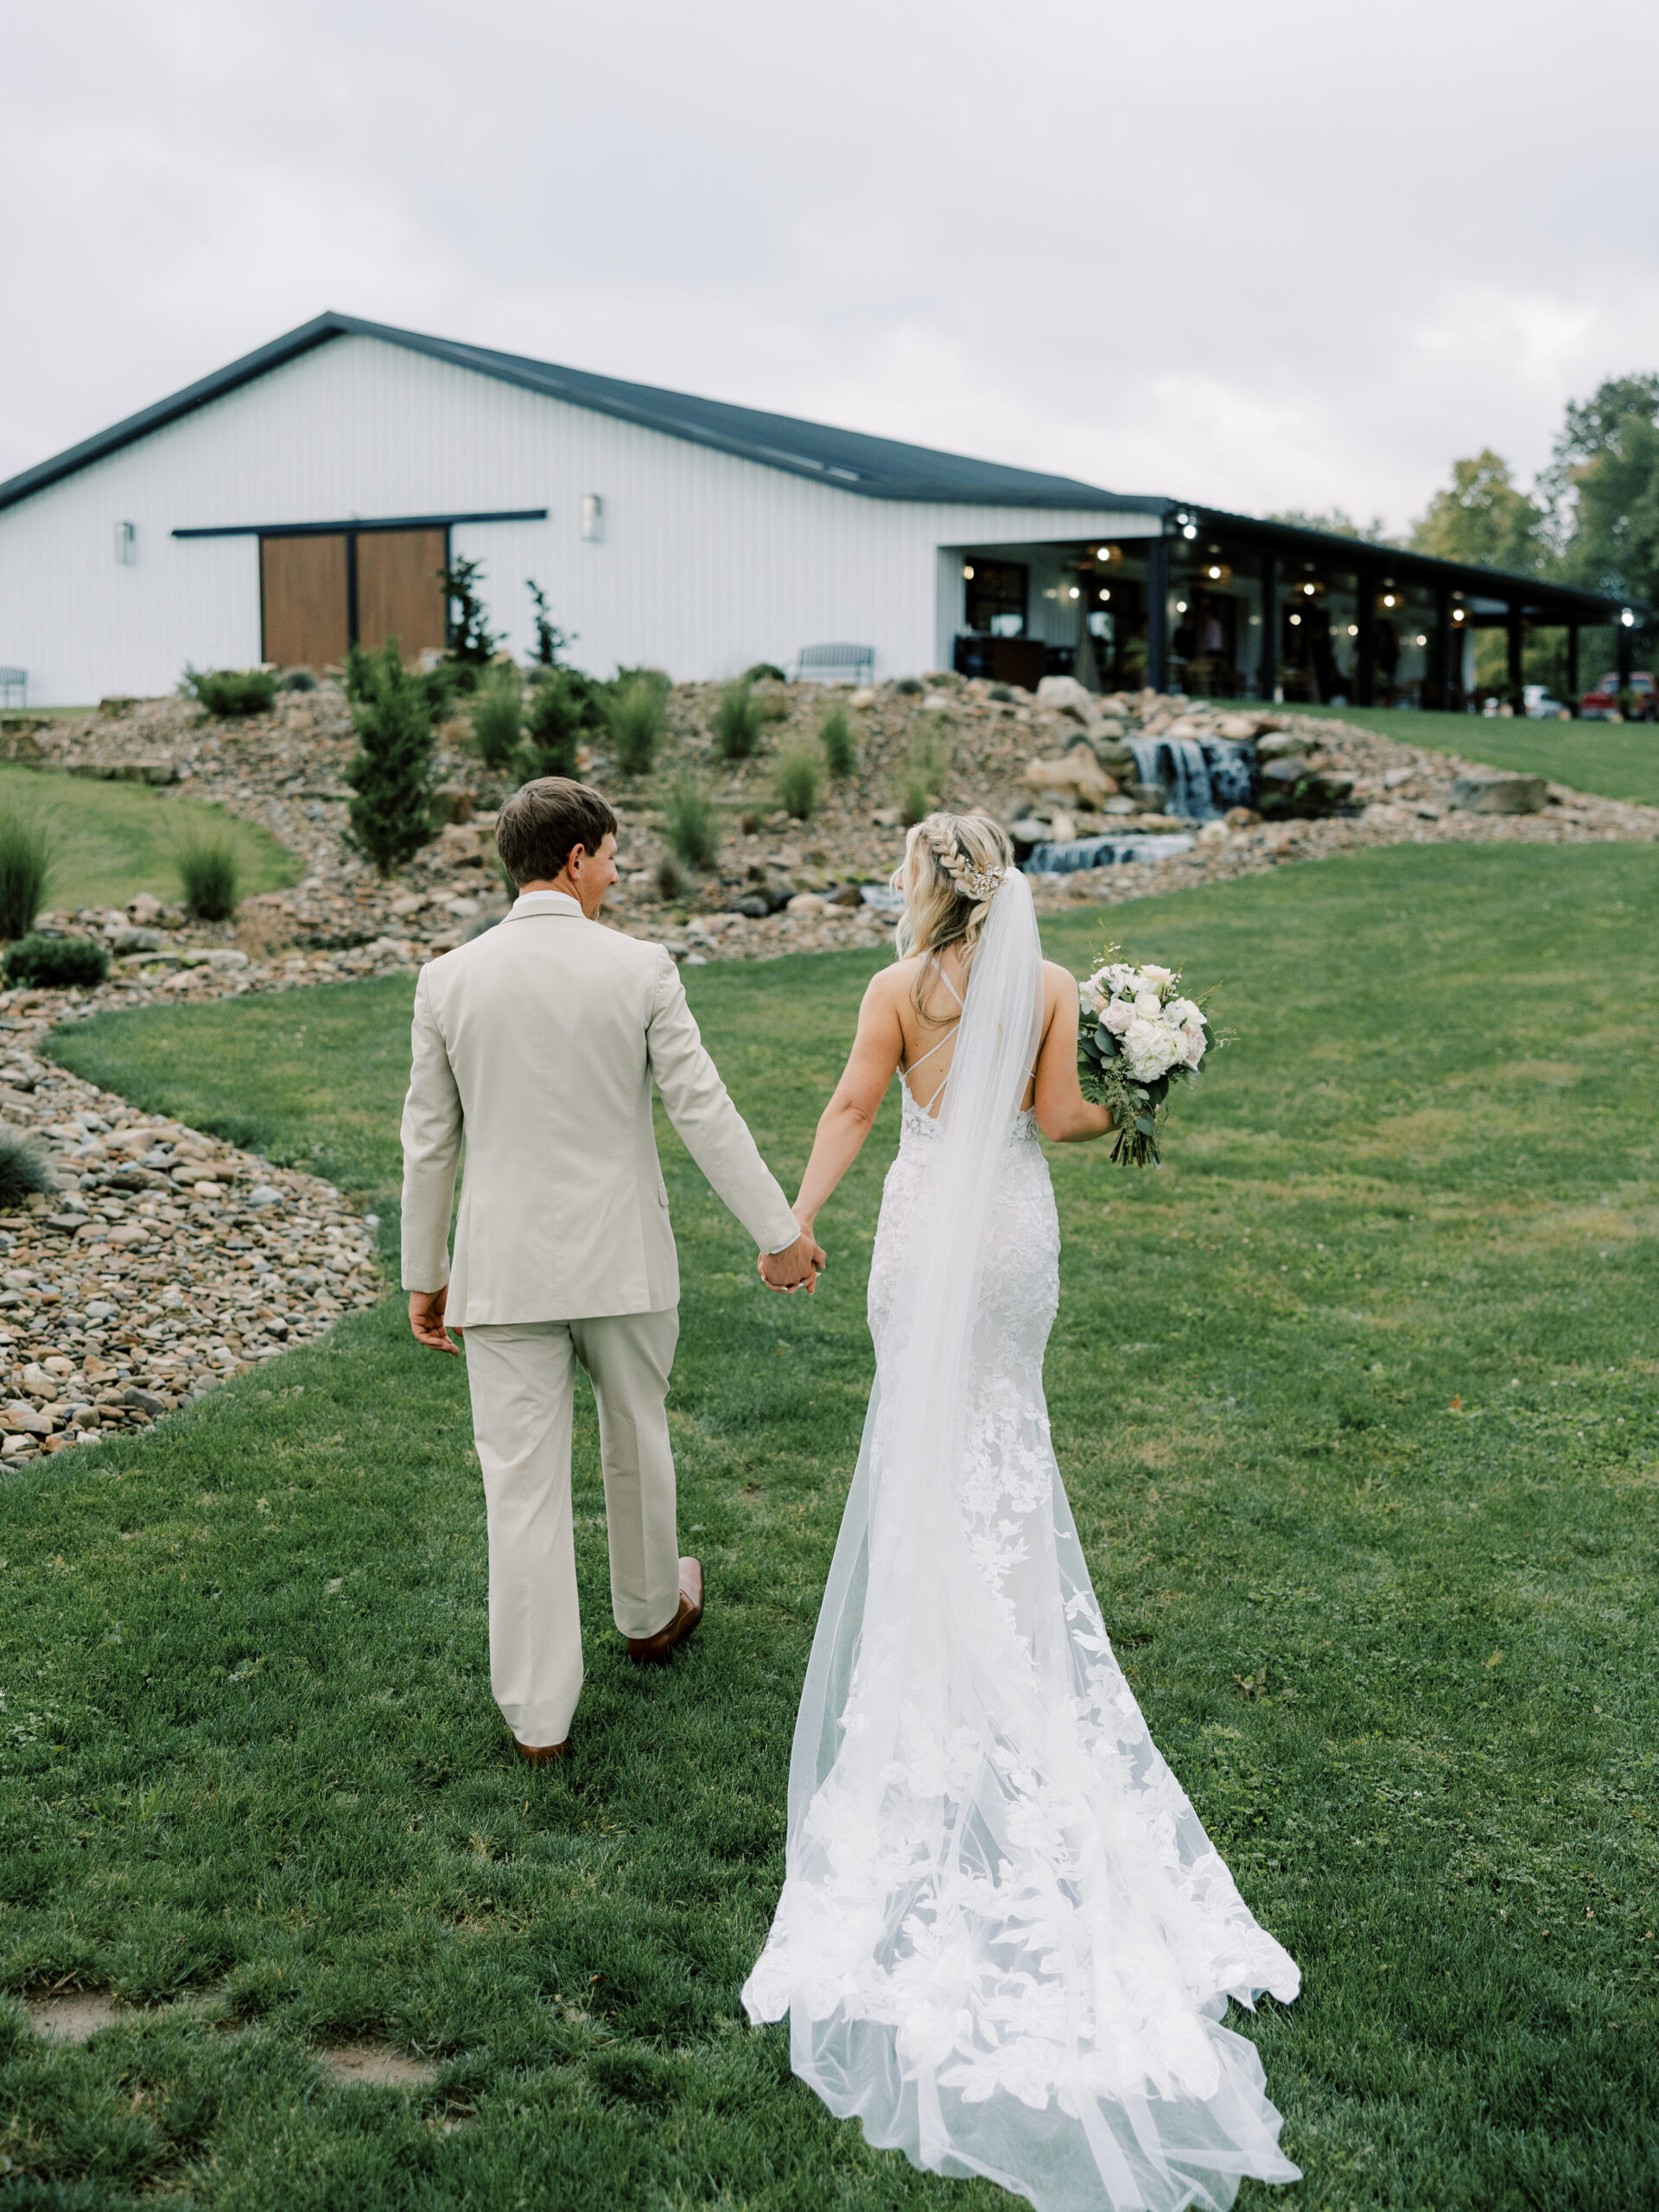 A photo of a bride and groom holding hands walking up towards the Harper Event Venue.